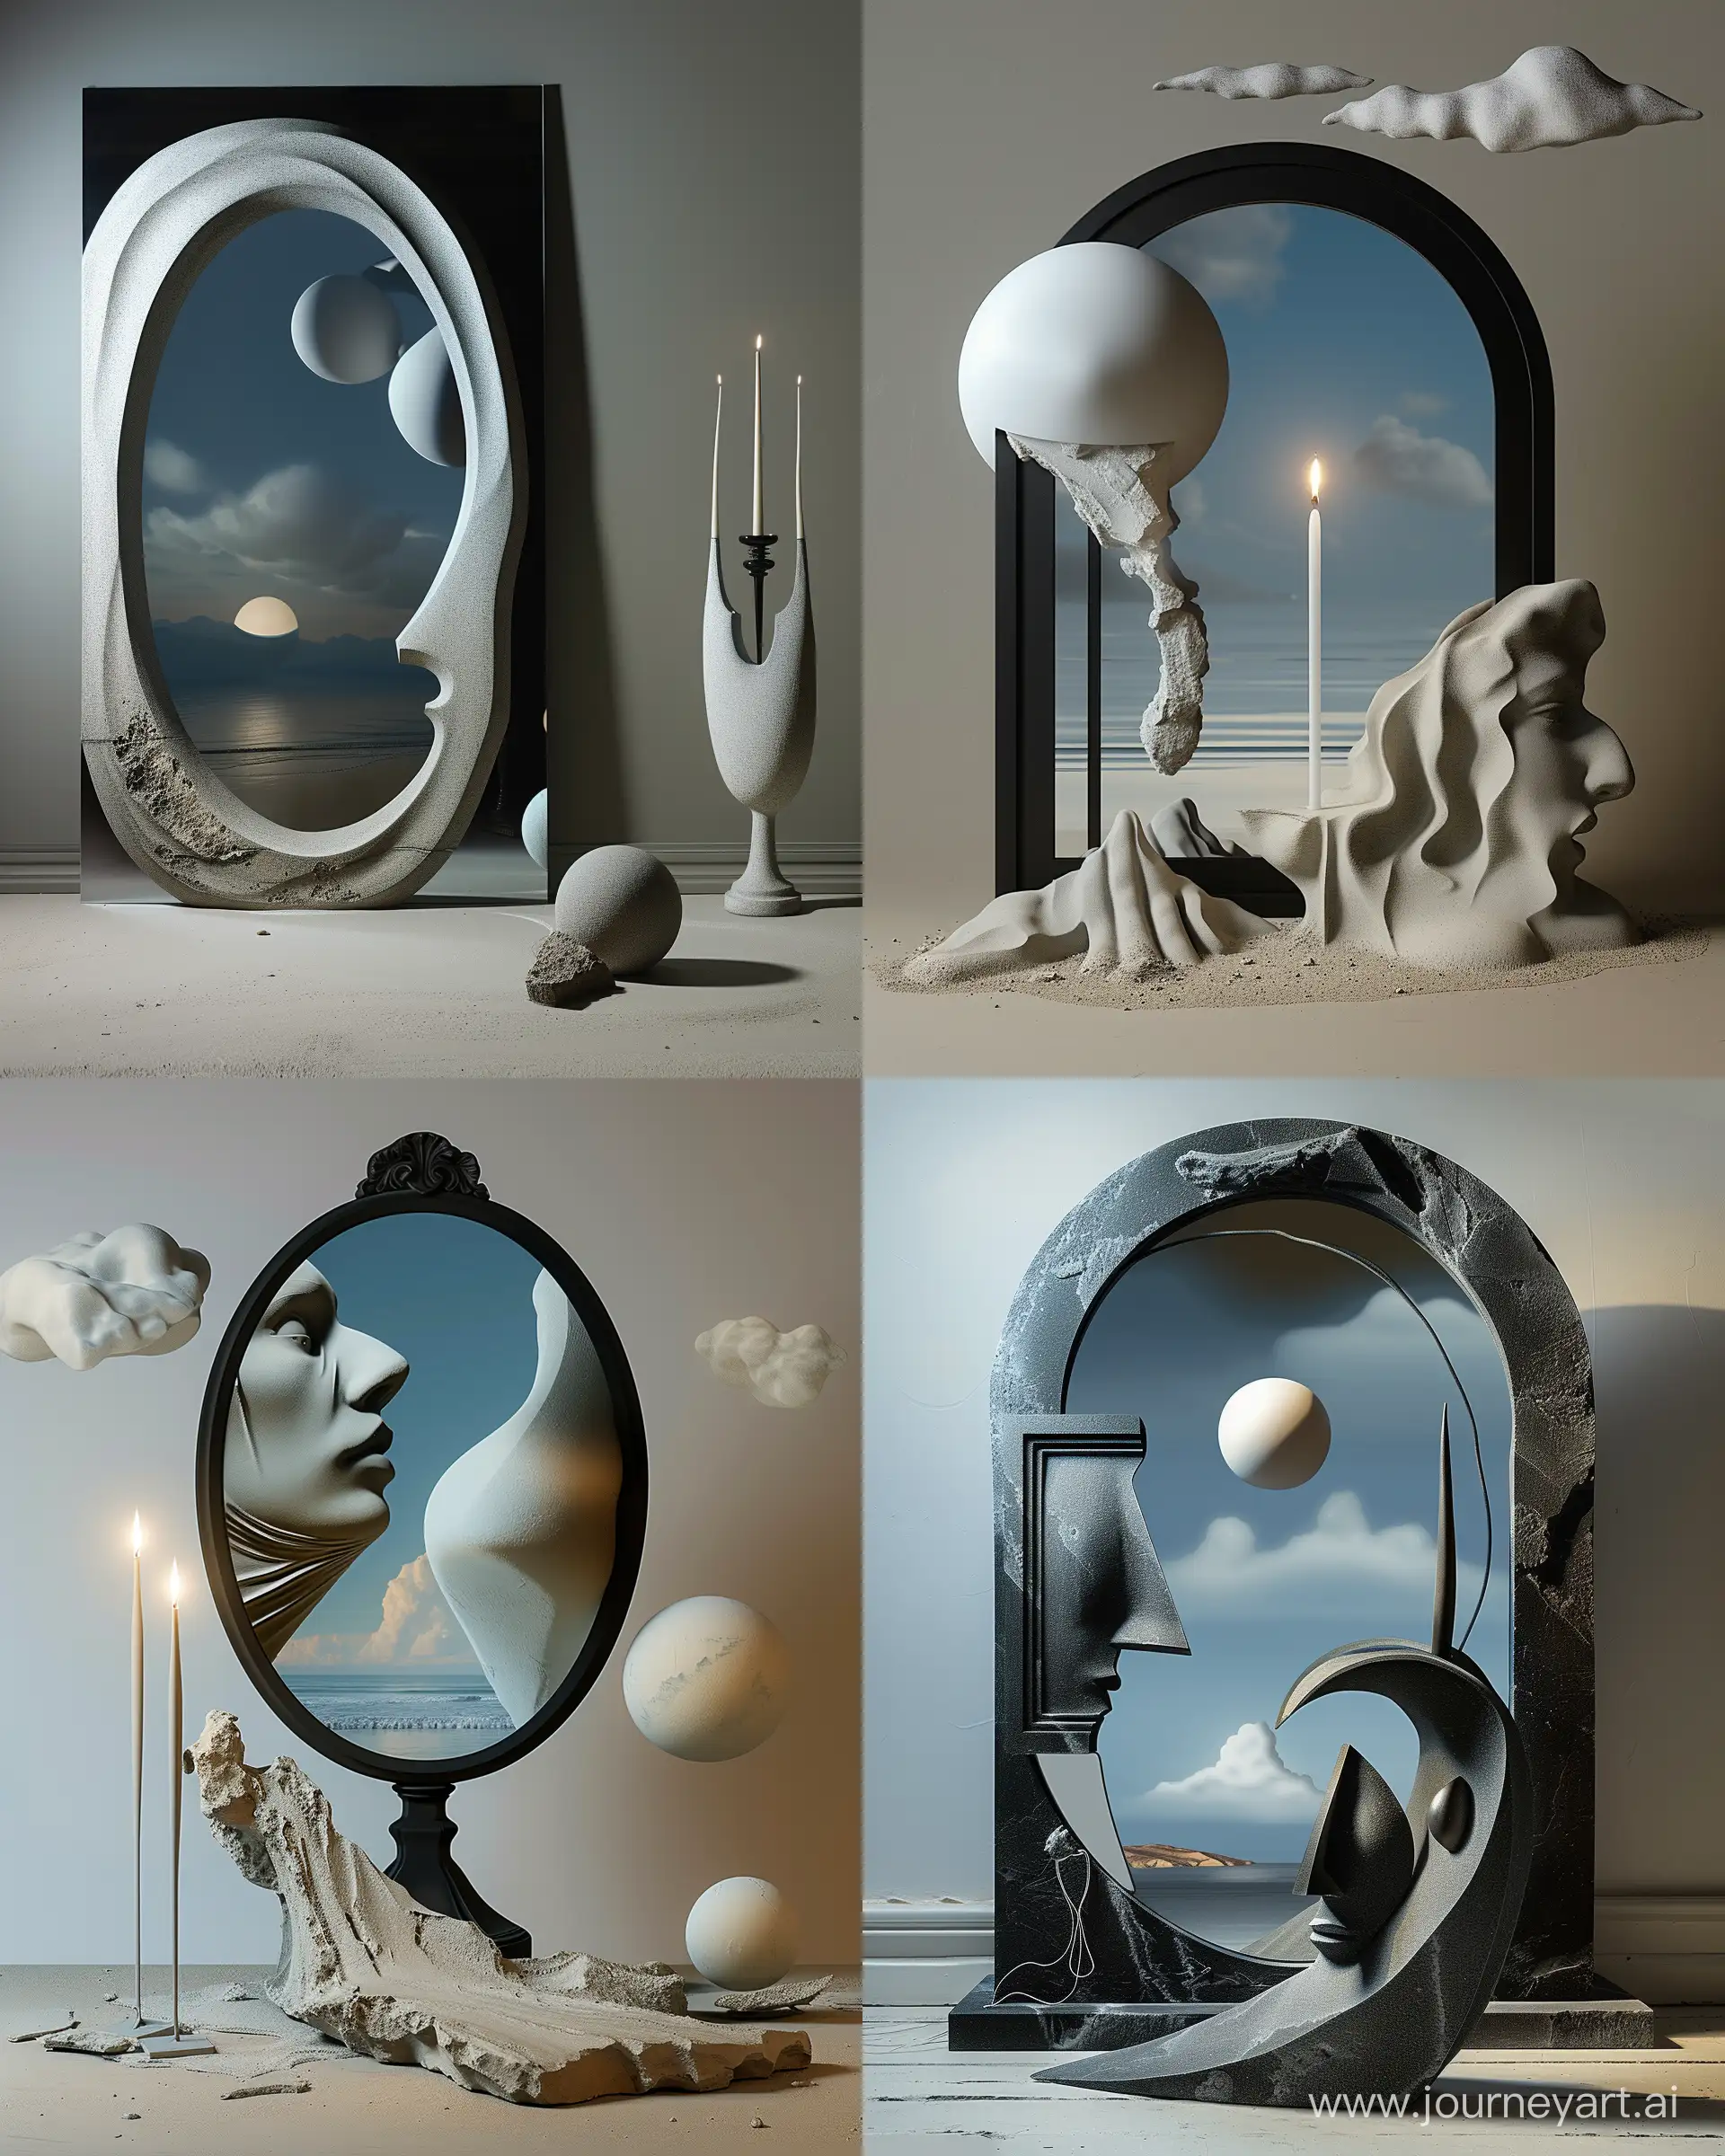 https://i.postimg.cc/rw73TdJ3/sdgery346-Abstract-and-poetic-sculpture-environment-art-in-a-r-e188aa8d-fc19-4253-abf3-e9e039fb9bb7.png,  a black mirror and an abstract portrait sculpture, surrealistic --ar 4:5

